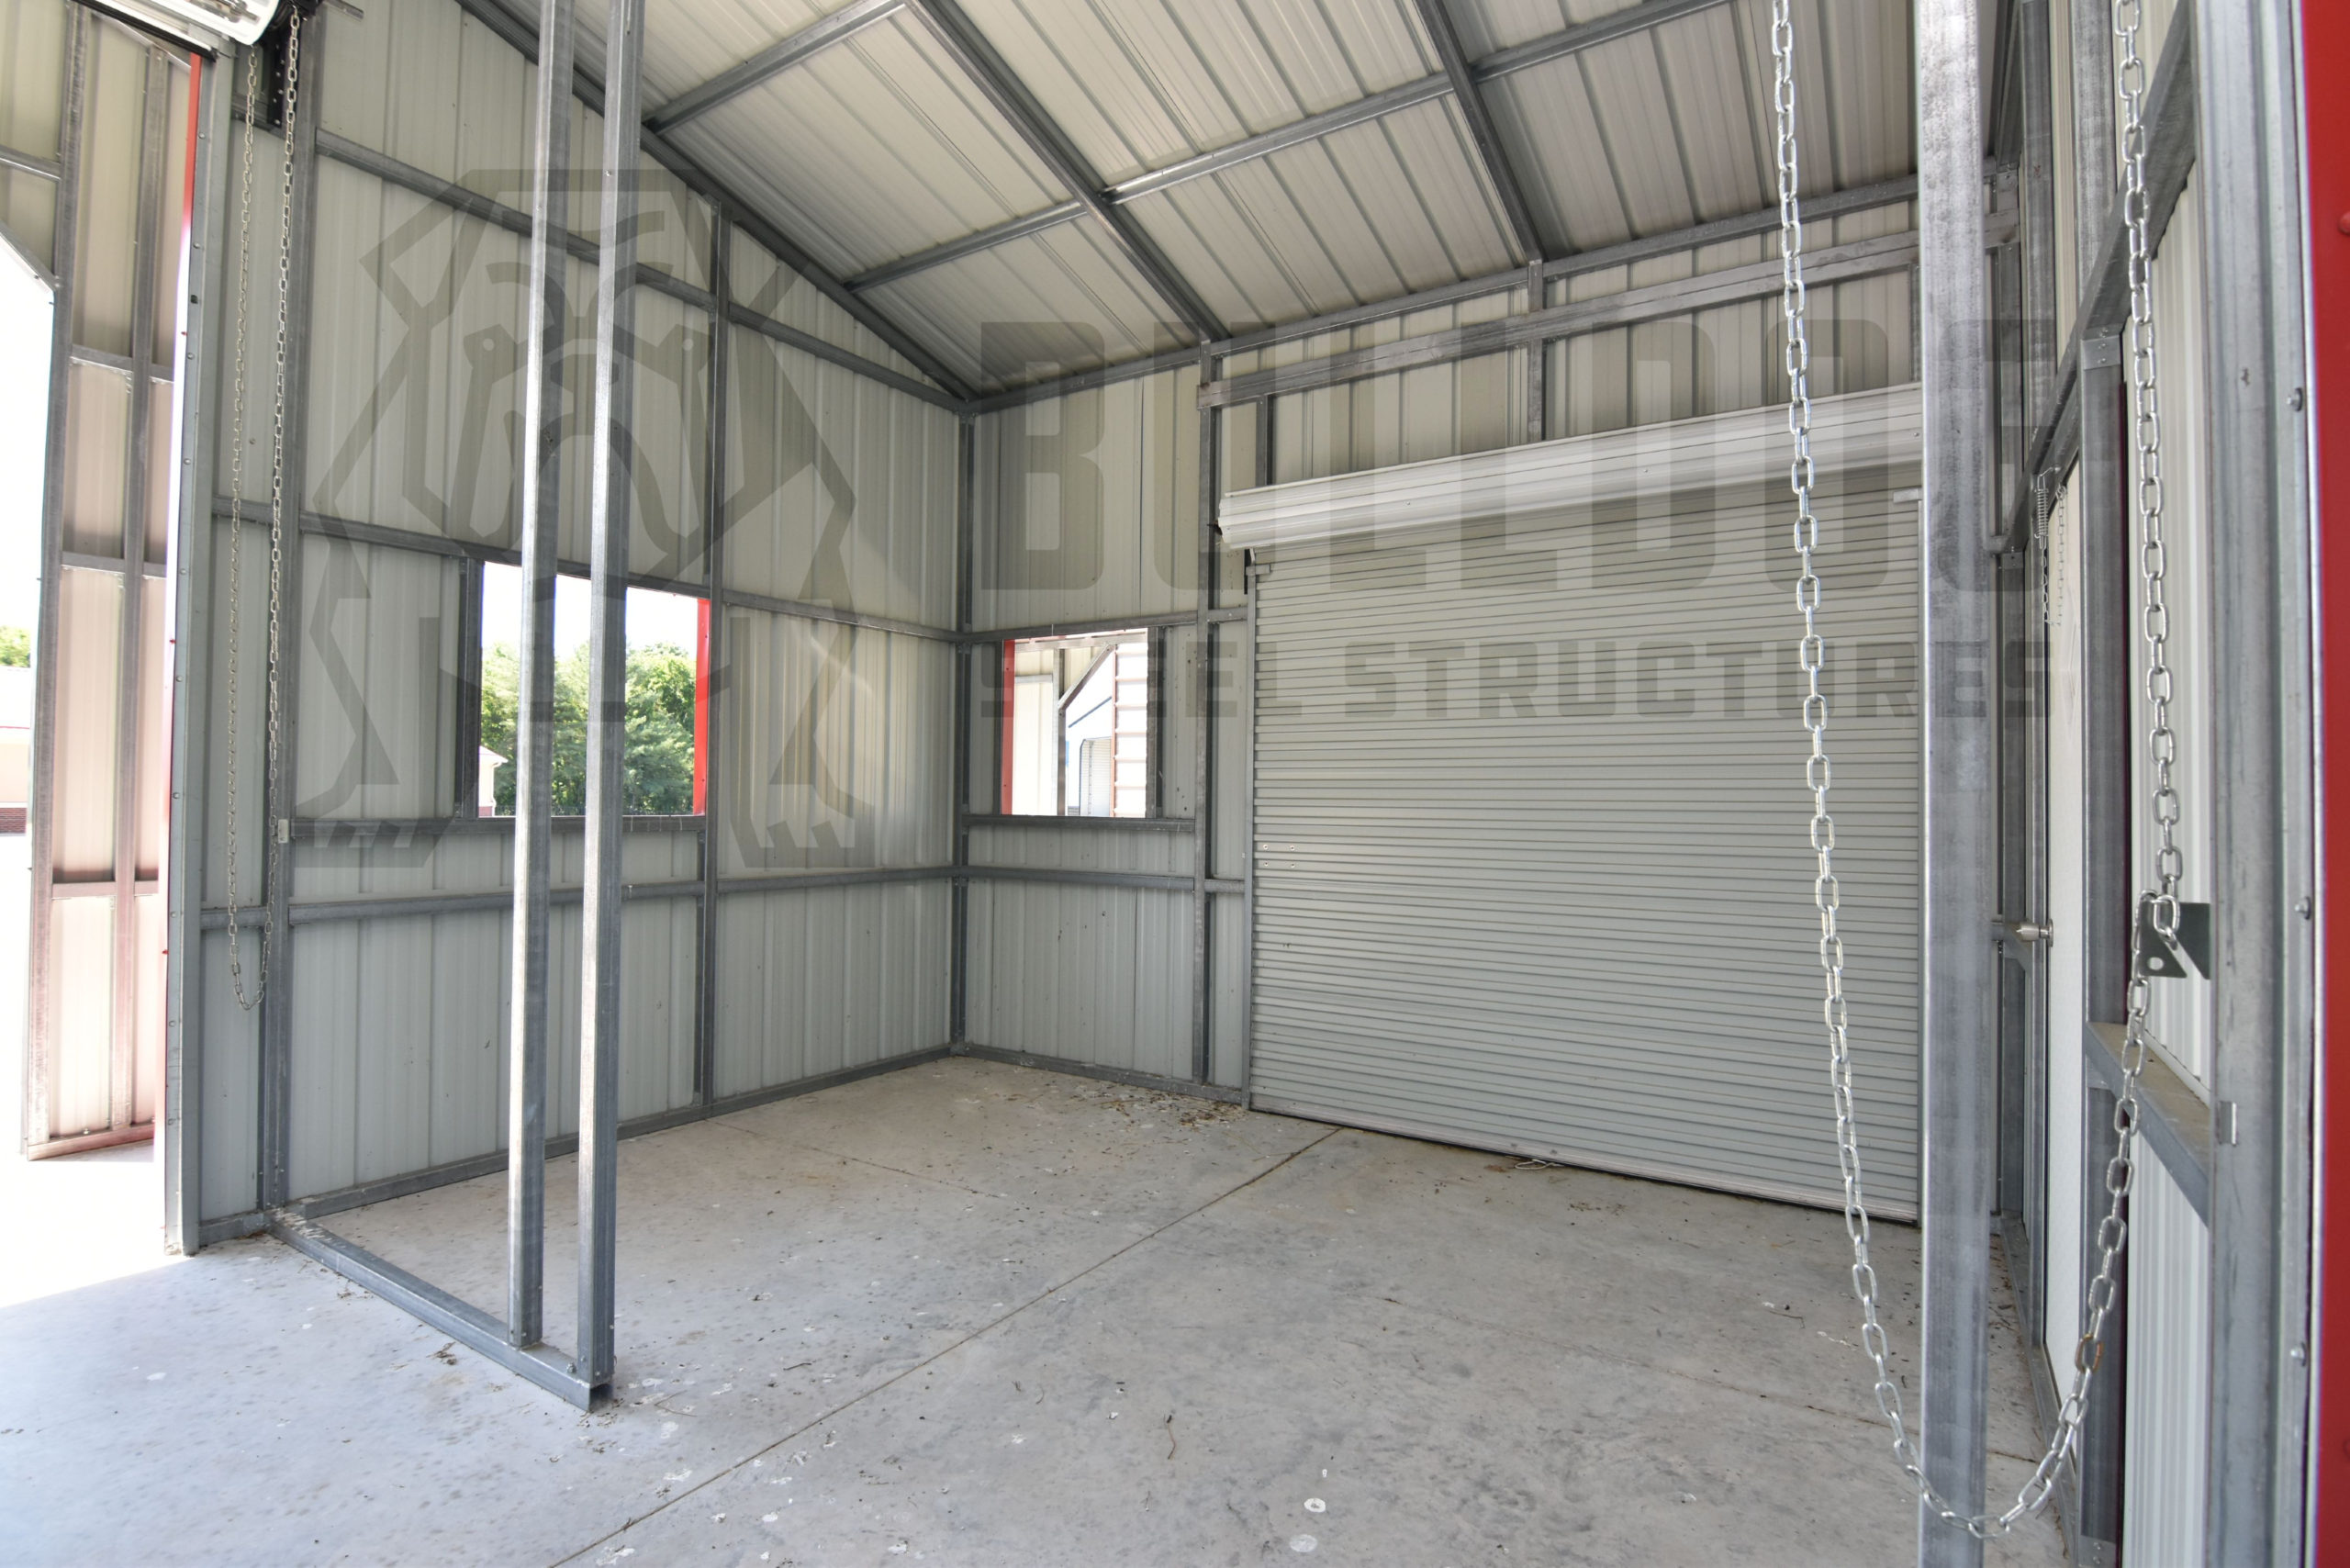 Interior of metal barn with red trim